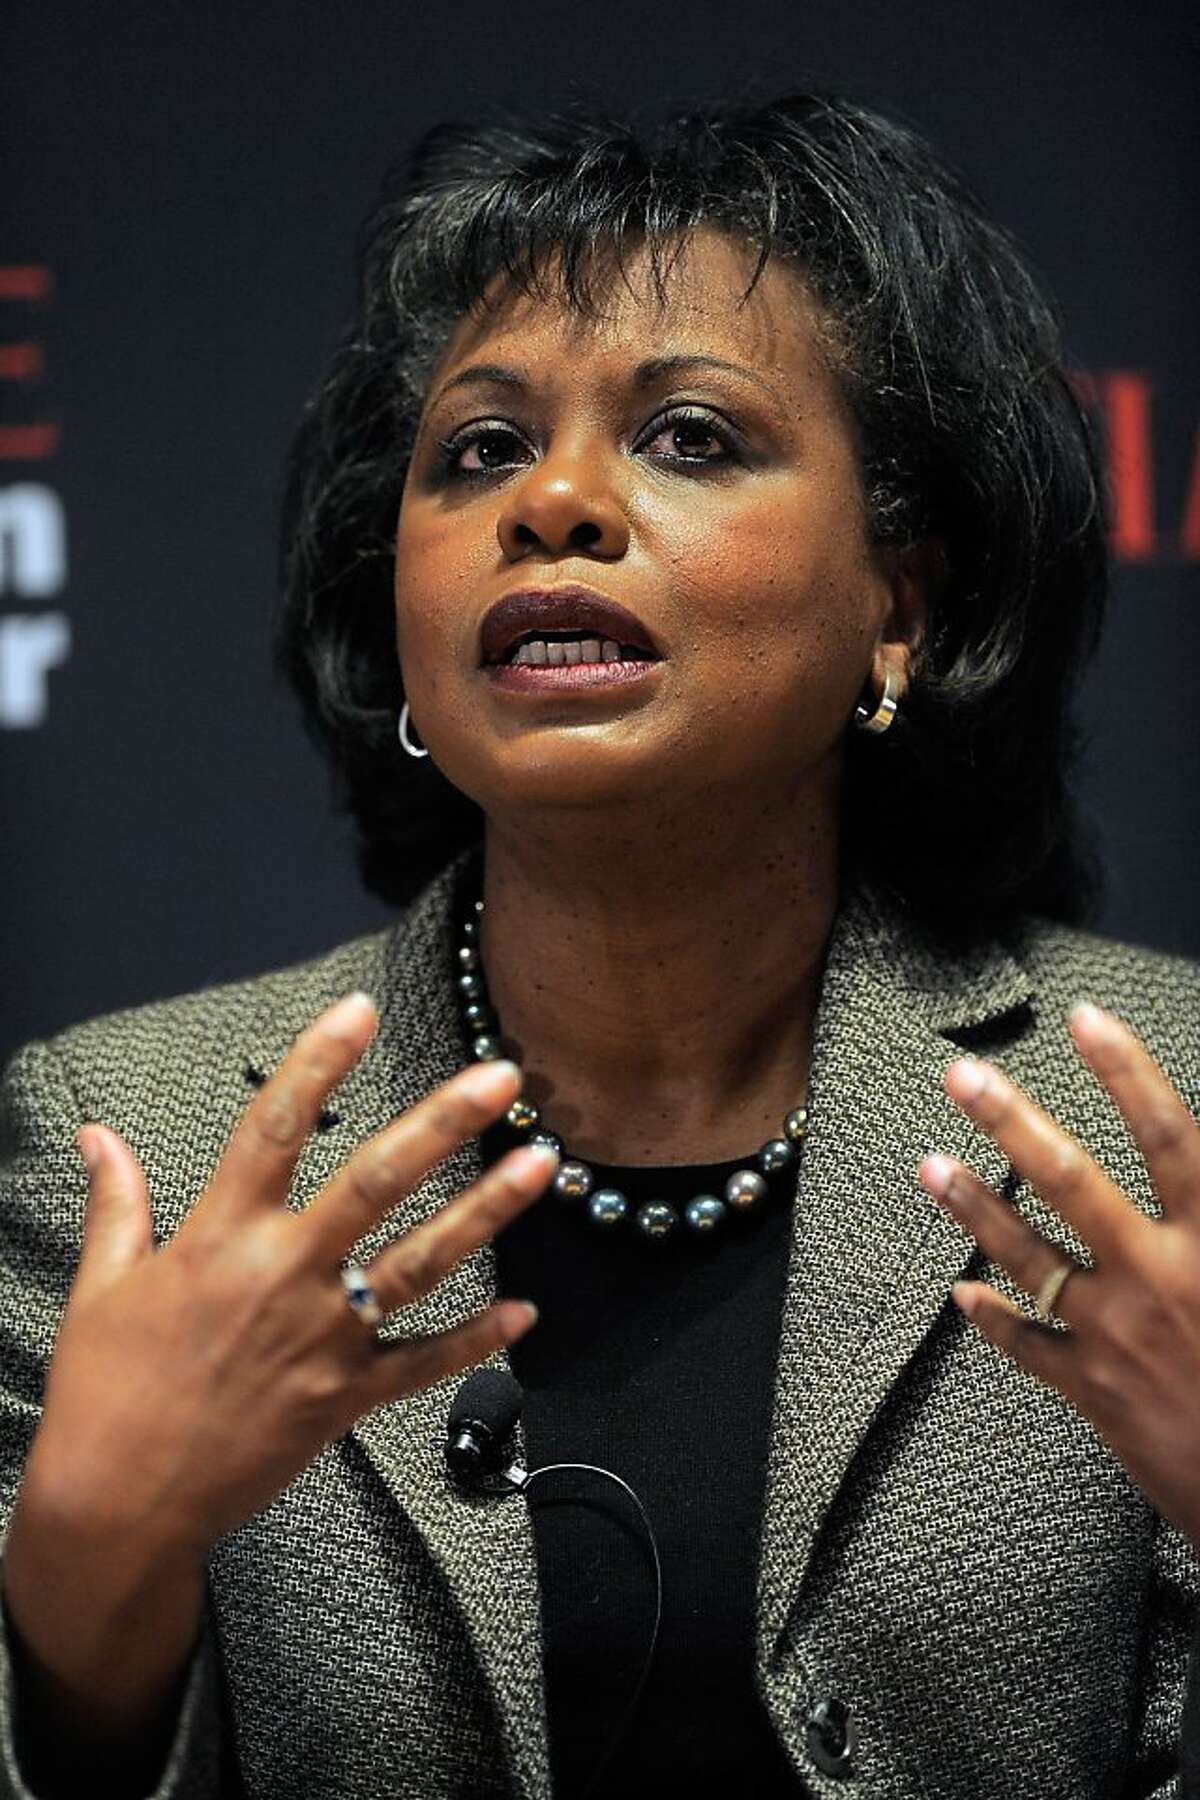 NEW YORK, NY - NOVEMBER 08: Professor Anita Hill speaks during the TIME Person of the Year panal discussion duing the TIME Person of the Year Lunch at Time Life Building on November 8, 2011 in New York City. NEW YORK, NY - NOVEMBER 08: Professor Anita Hill speaks during the TIME Person of the Year panal discussion duing the TIME Person of the Year Lunch at Time Life Building on November 8, 2011 in New York City. (Photo by Jemal Countess/Getty Images for Time)